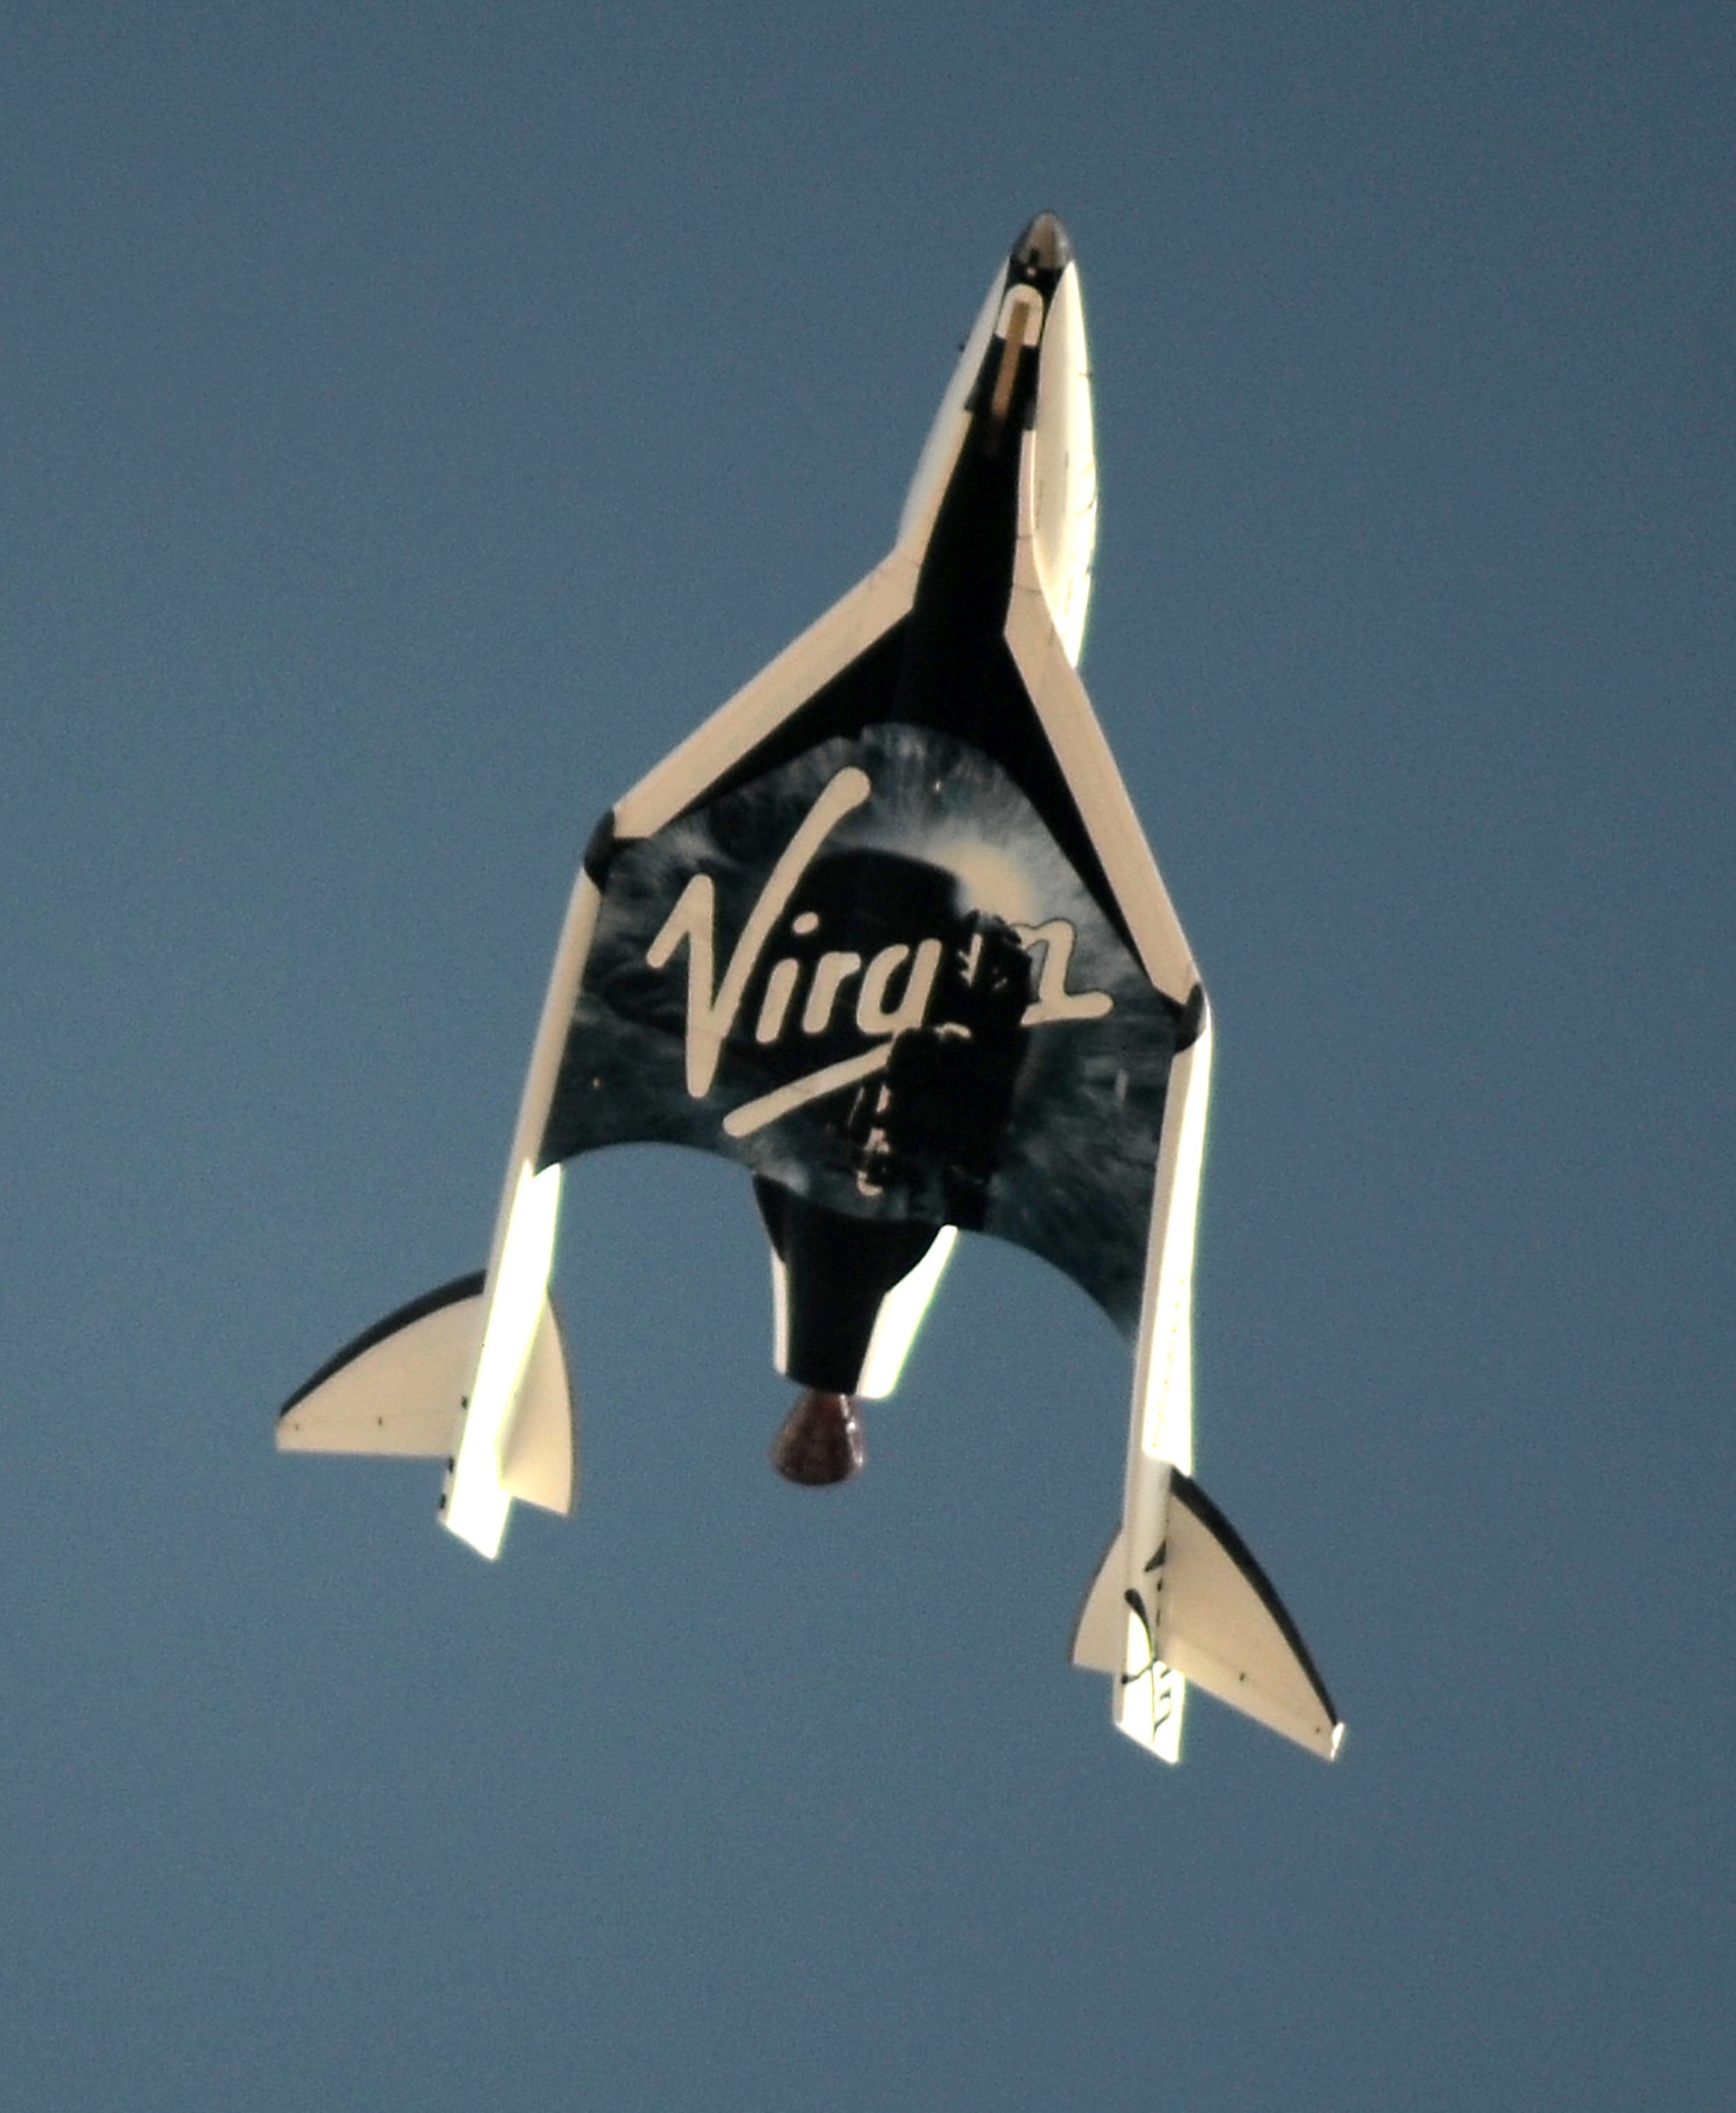 Virgin Galactic's SpaceShip Two (SS2), the world's first commercial spaceship owned by Sir Richard Branson's Virgin Group